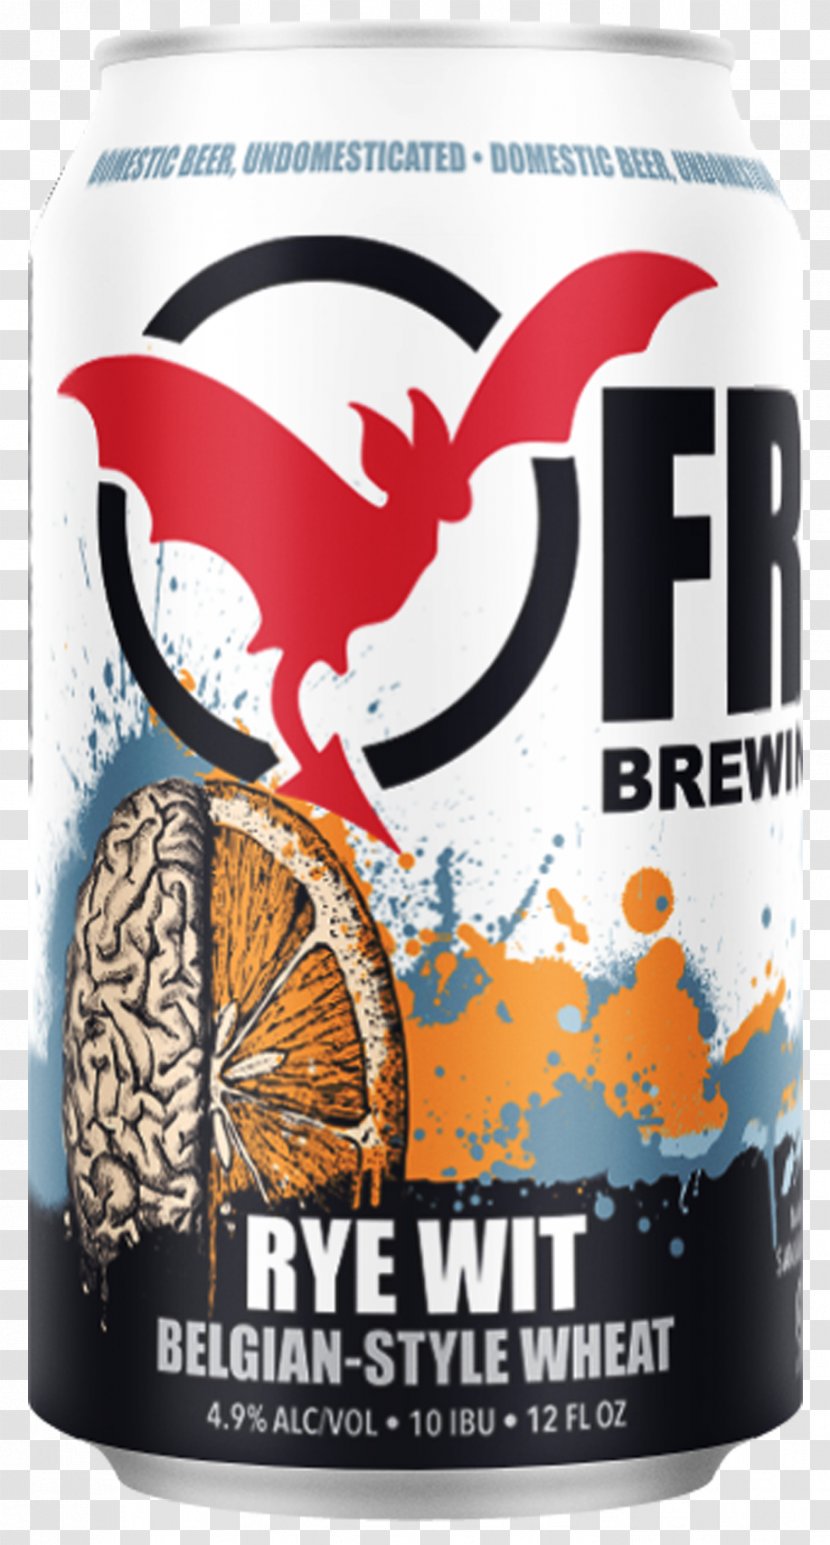 Beer Brewing Grains & Malts BAKFISH Company Freetail Co. Brewery - Aluminum Can Transparent PNG